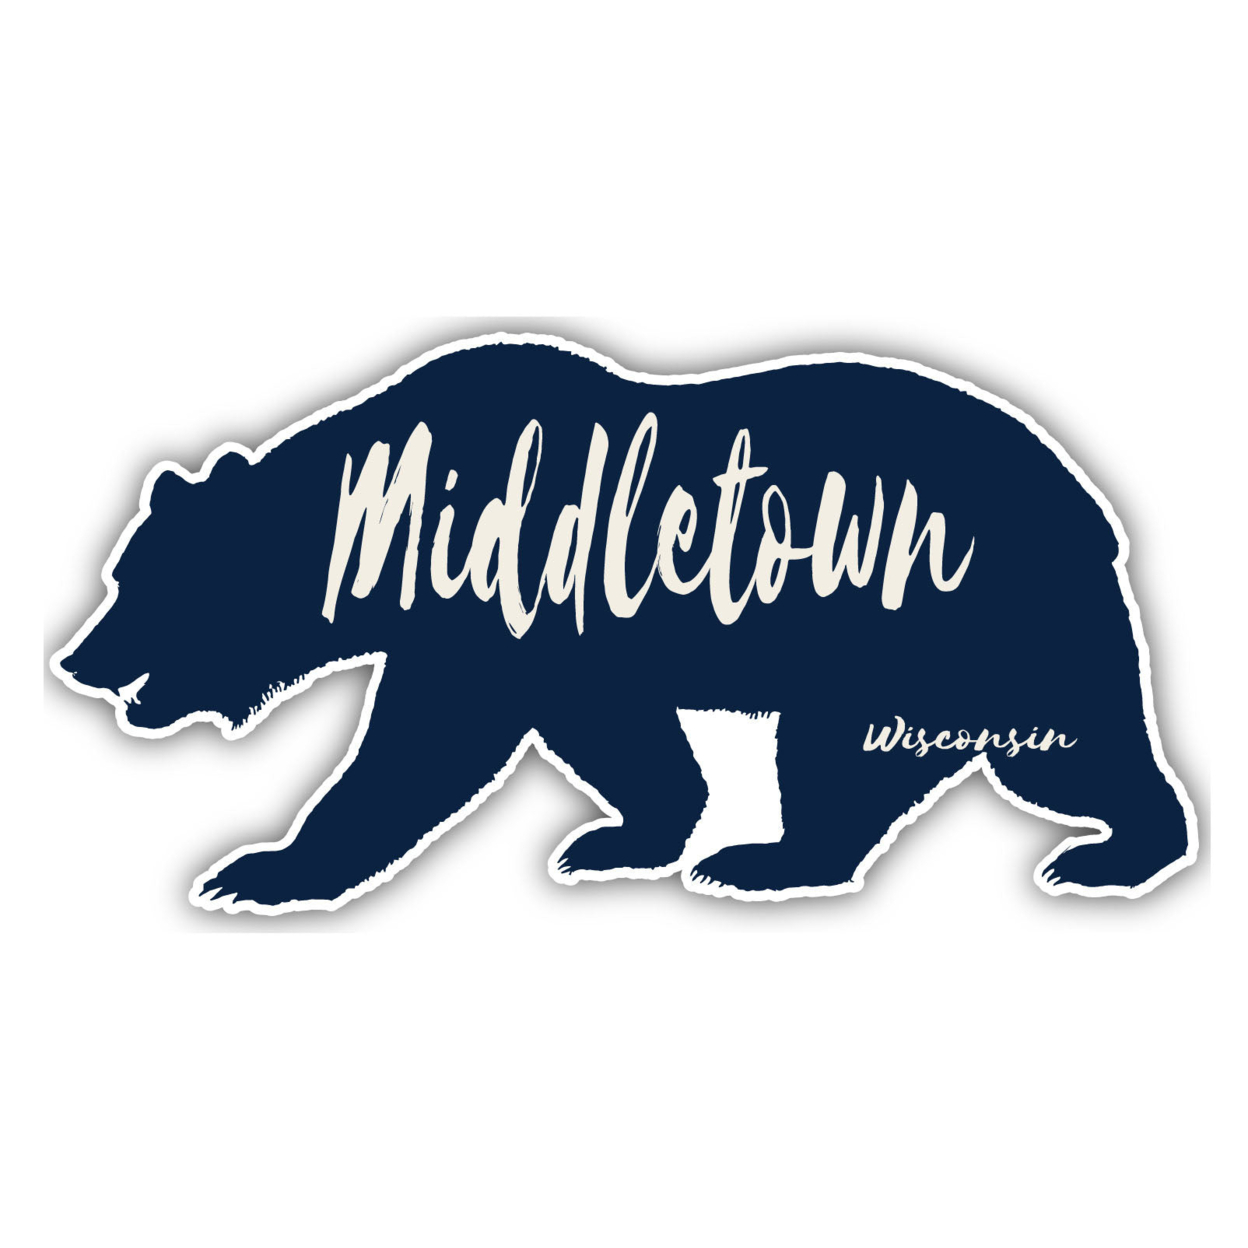 Middletown Wisconsin Souvenir Decorative Stickers (Choose Theme And Size) - 4-Inch, Bear